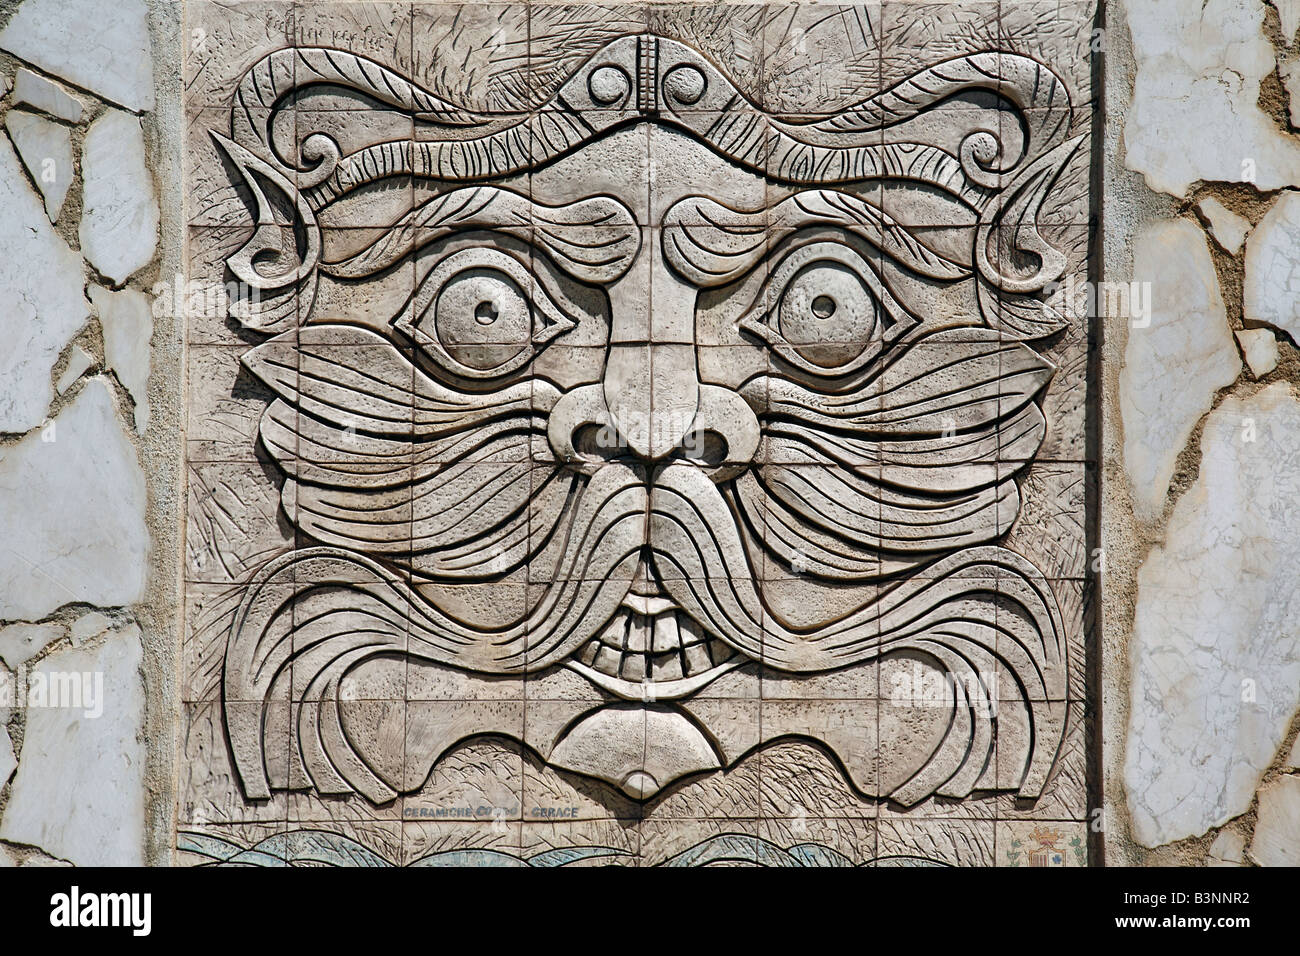 Italy, Calabria, Palmi, Province of Reggio Calabria, Viola Coast, Strait of Messina, Straits of Messina, mask at a wall, relief, grimace, visage, hideous face, snoot, mow, mowe, apotropaically, apotropaic, superstition, superstitiousness, bale, calamity, Stock Photo